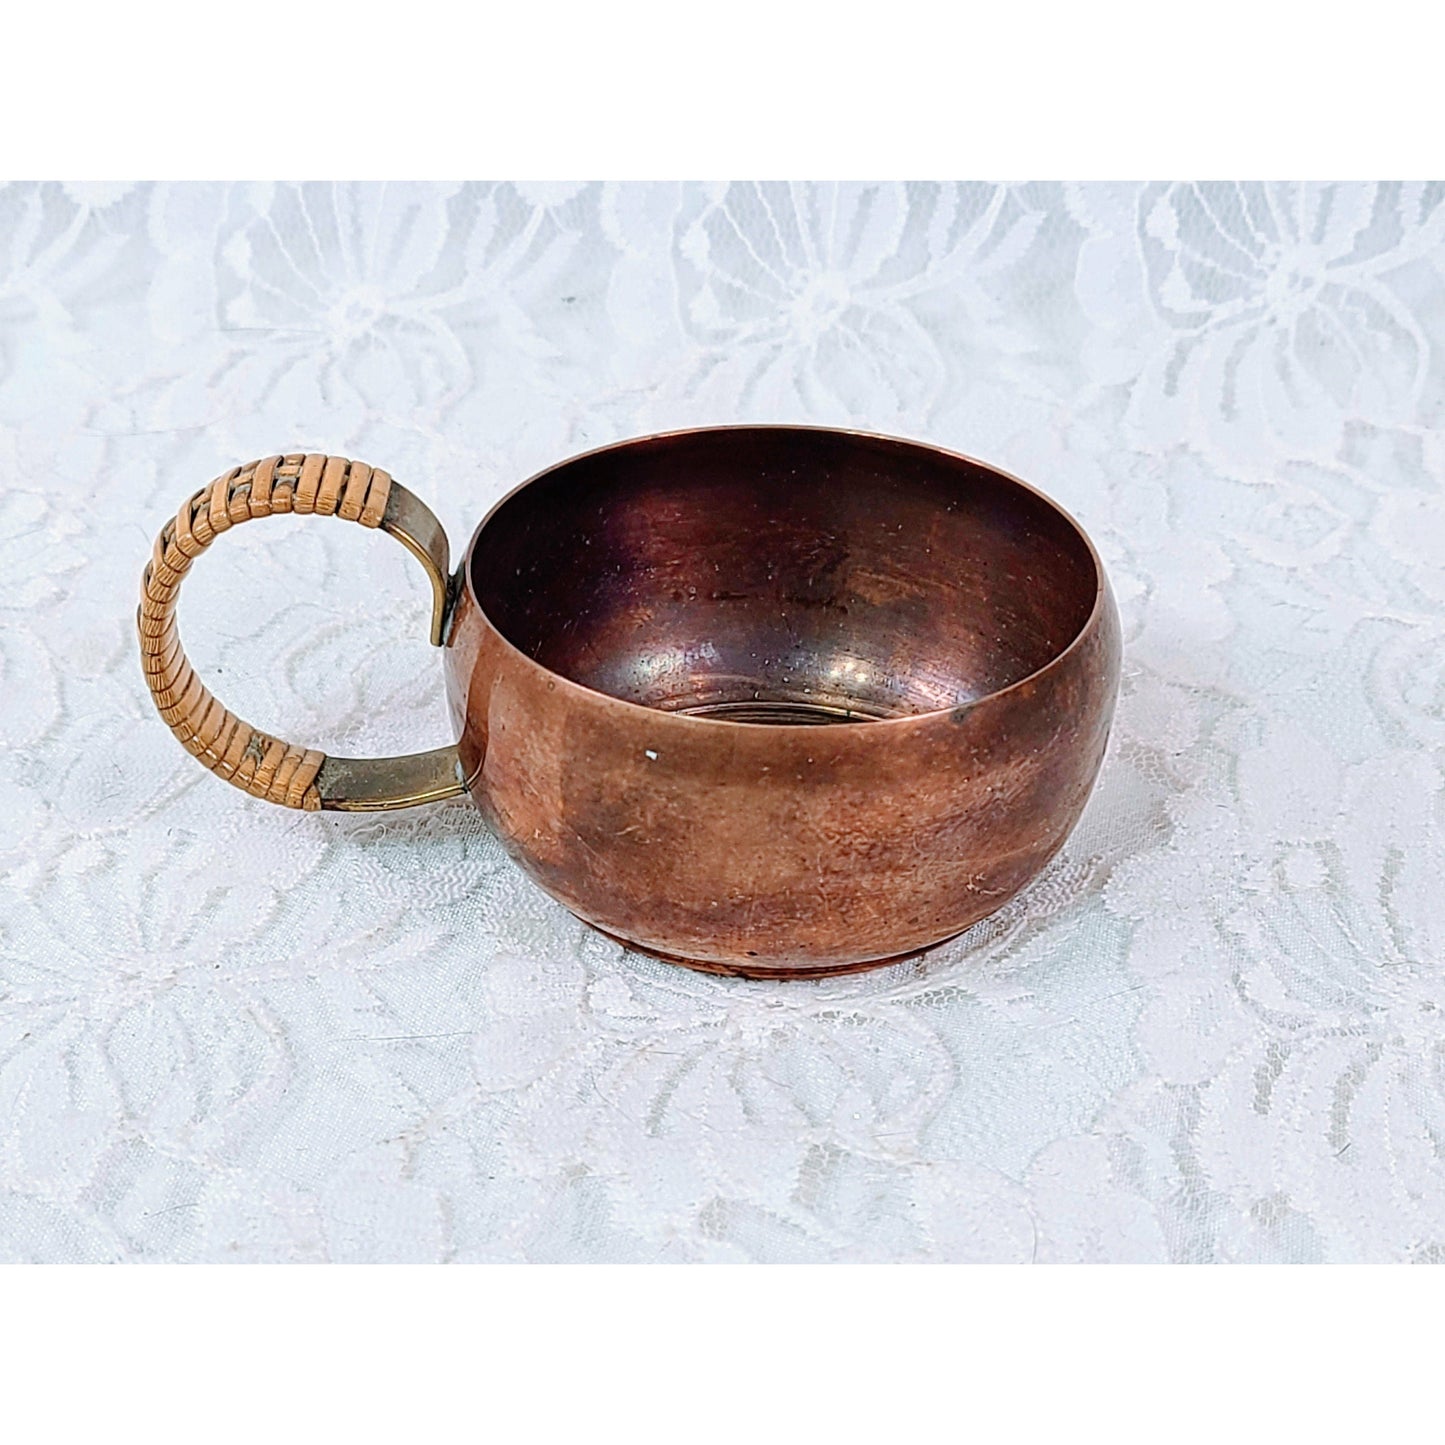 Antique Primitive Hand-Hammered Copper Mug with Rattan Bamboo Wrapped Handle ~ Small 2.75" Demitasse Espresso Cup ~ Hand Made Mid-Century